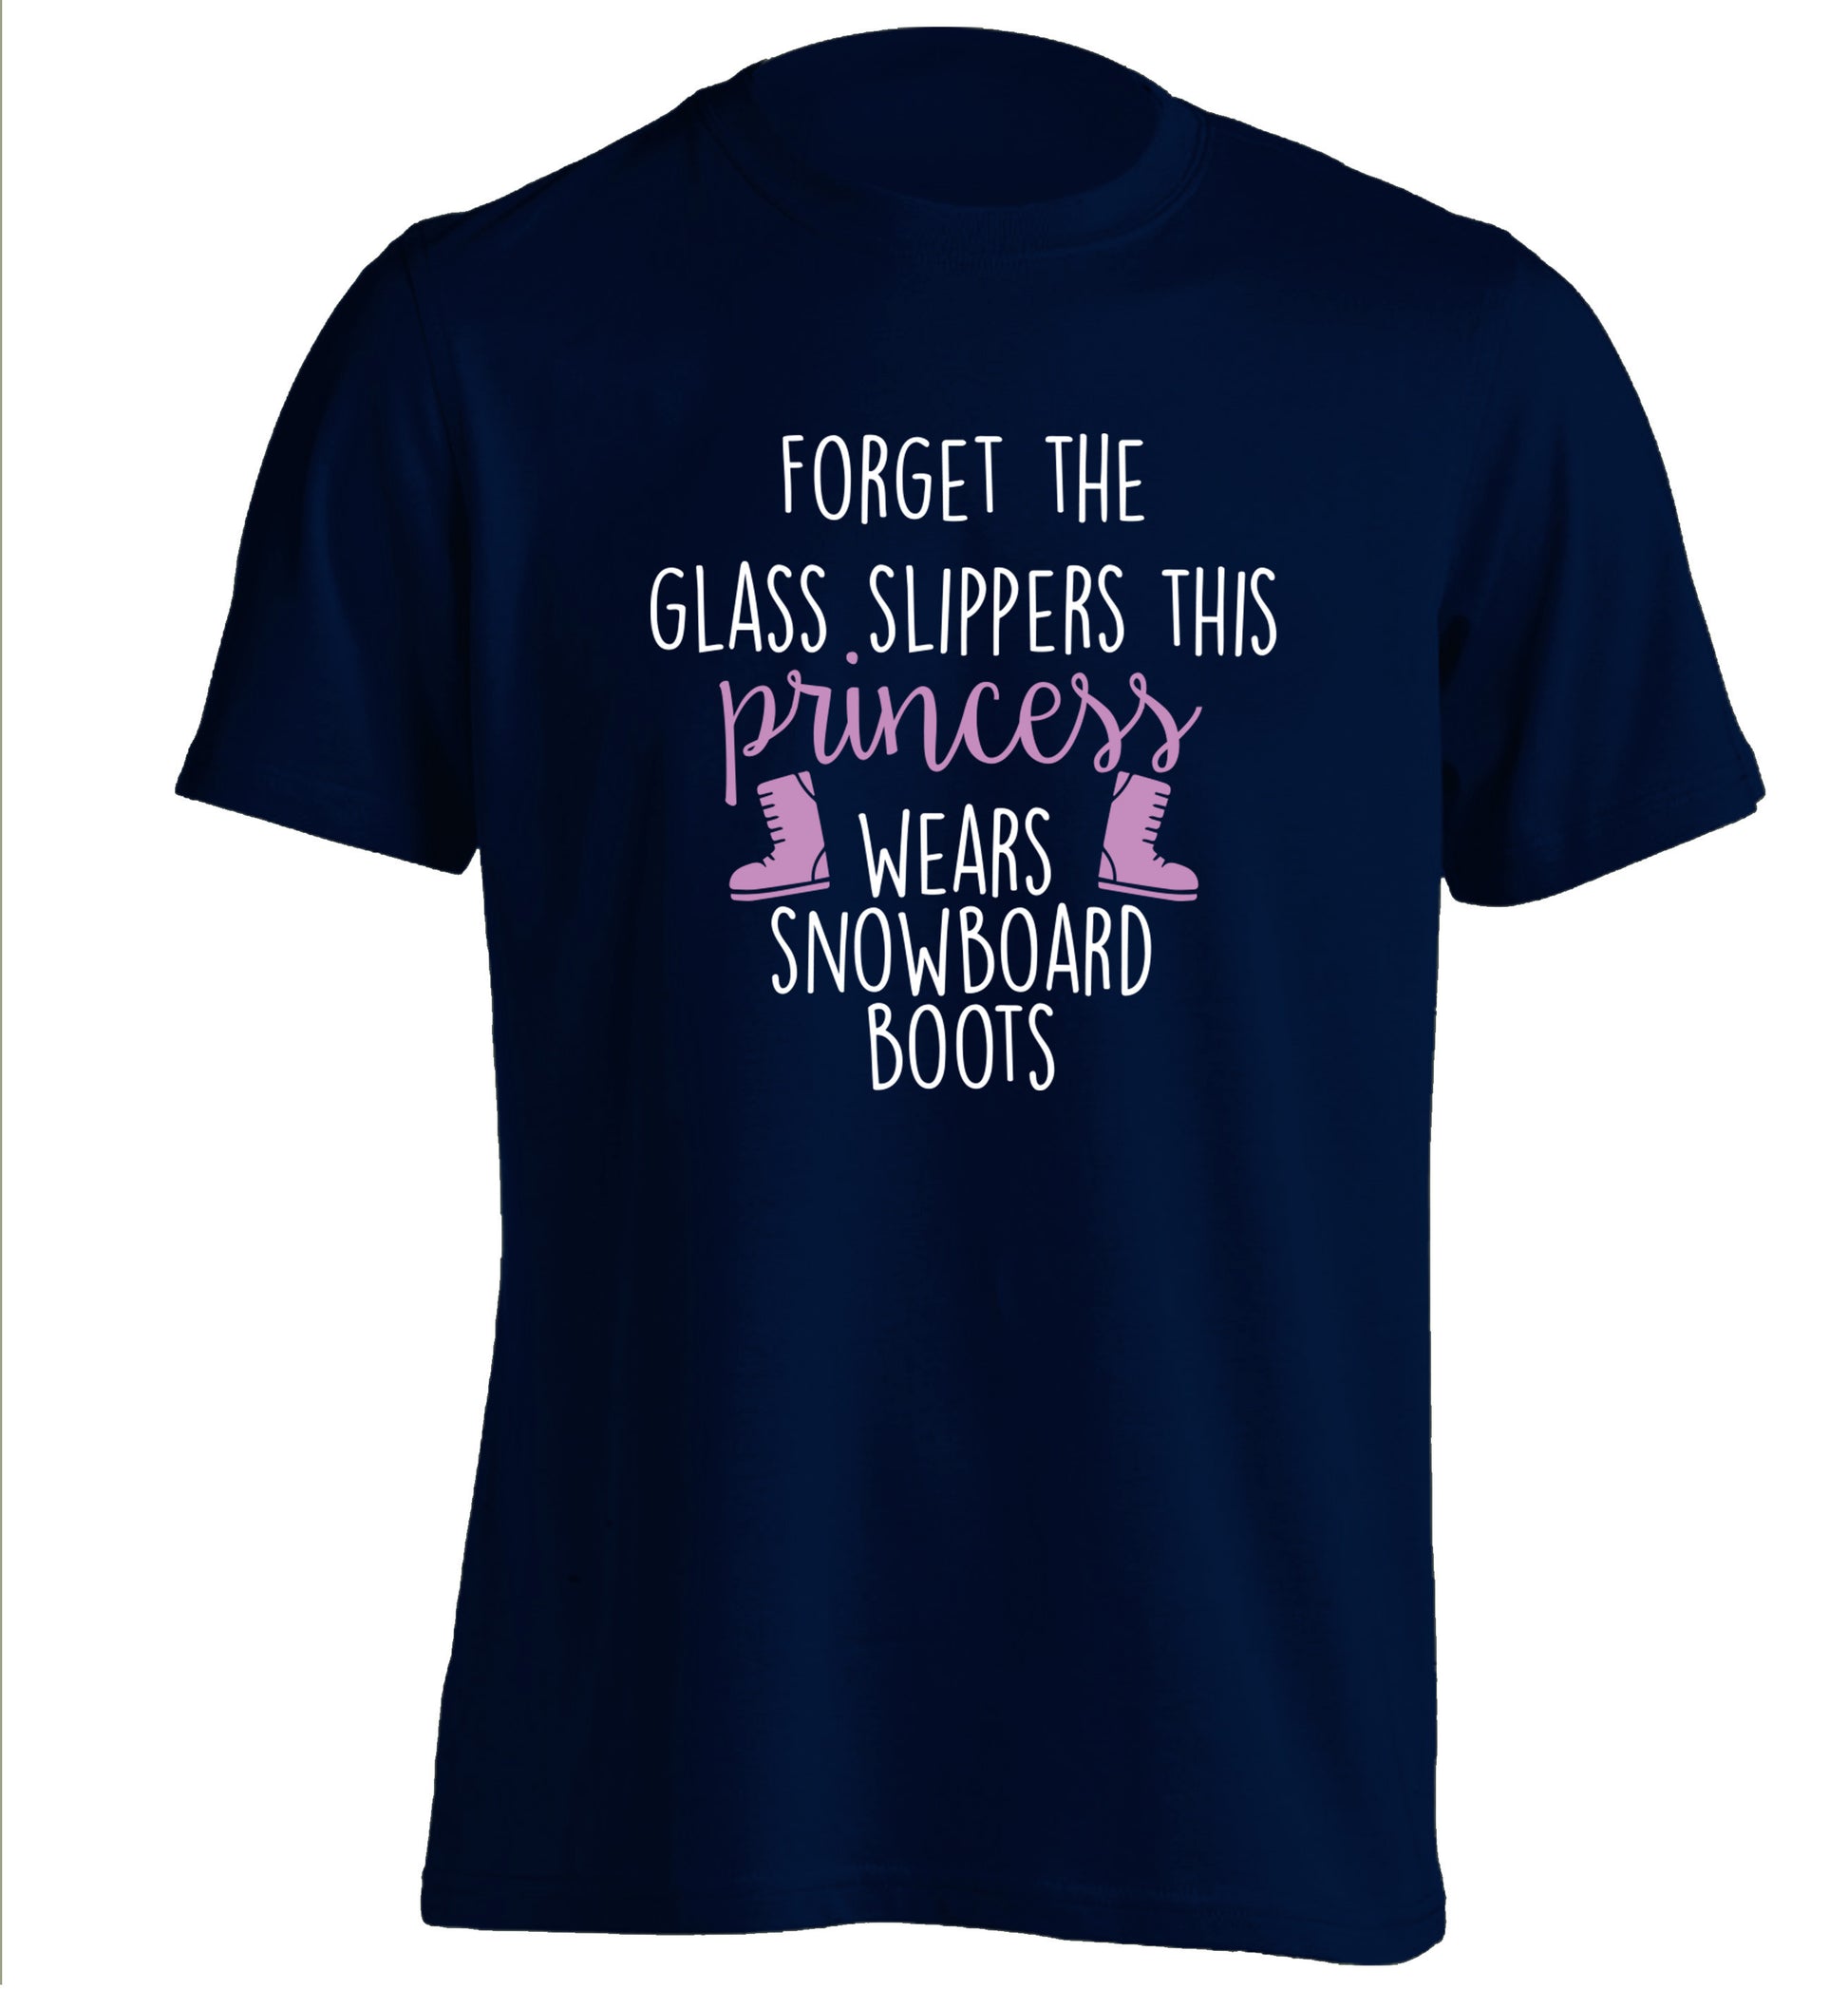 Forget the glass slippers this princess wears snowboard boots adults unisex navy Tshirt 2XL